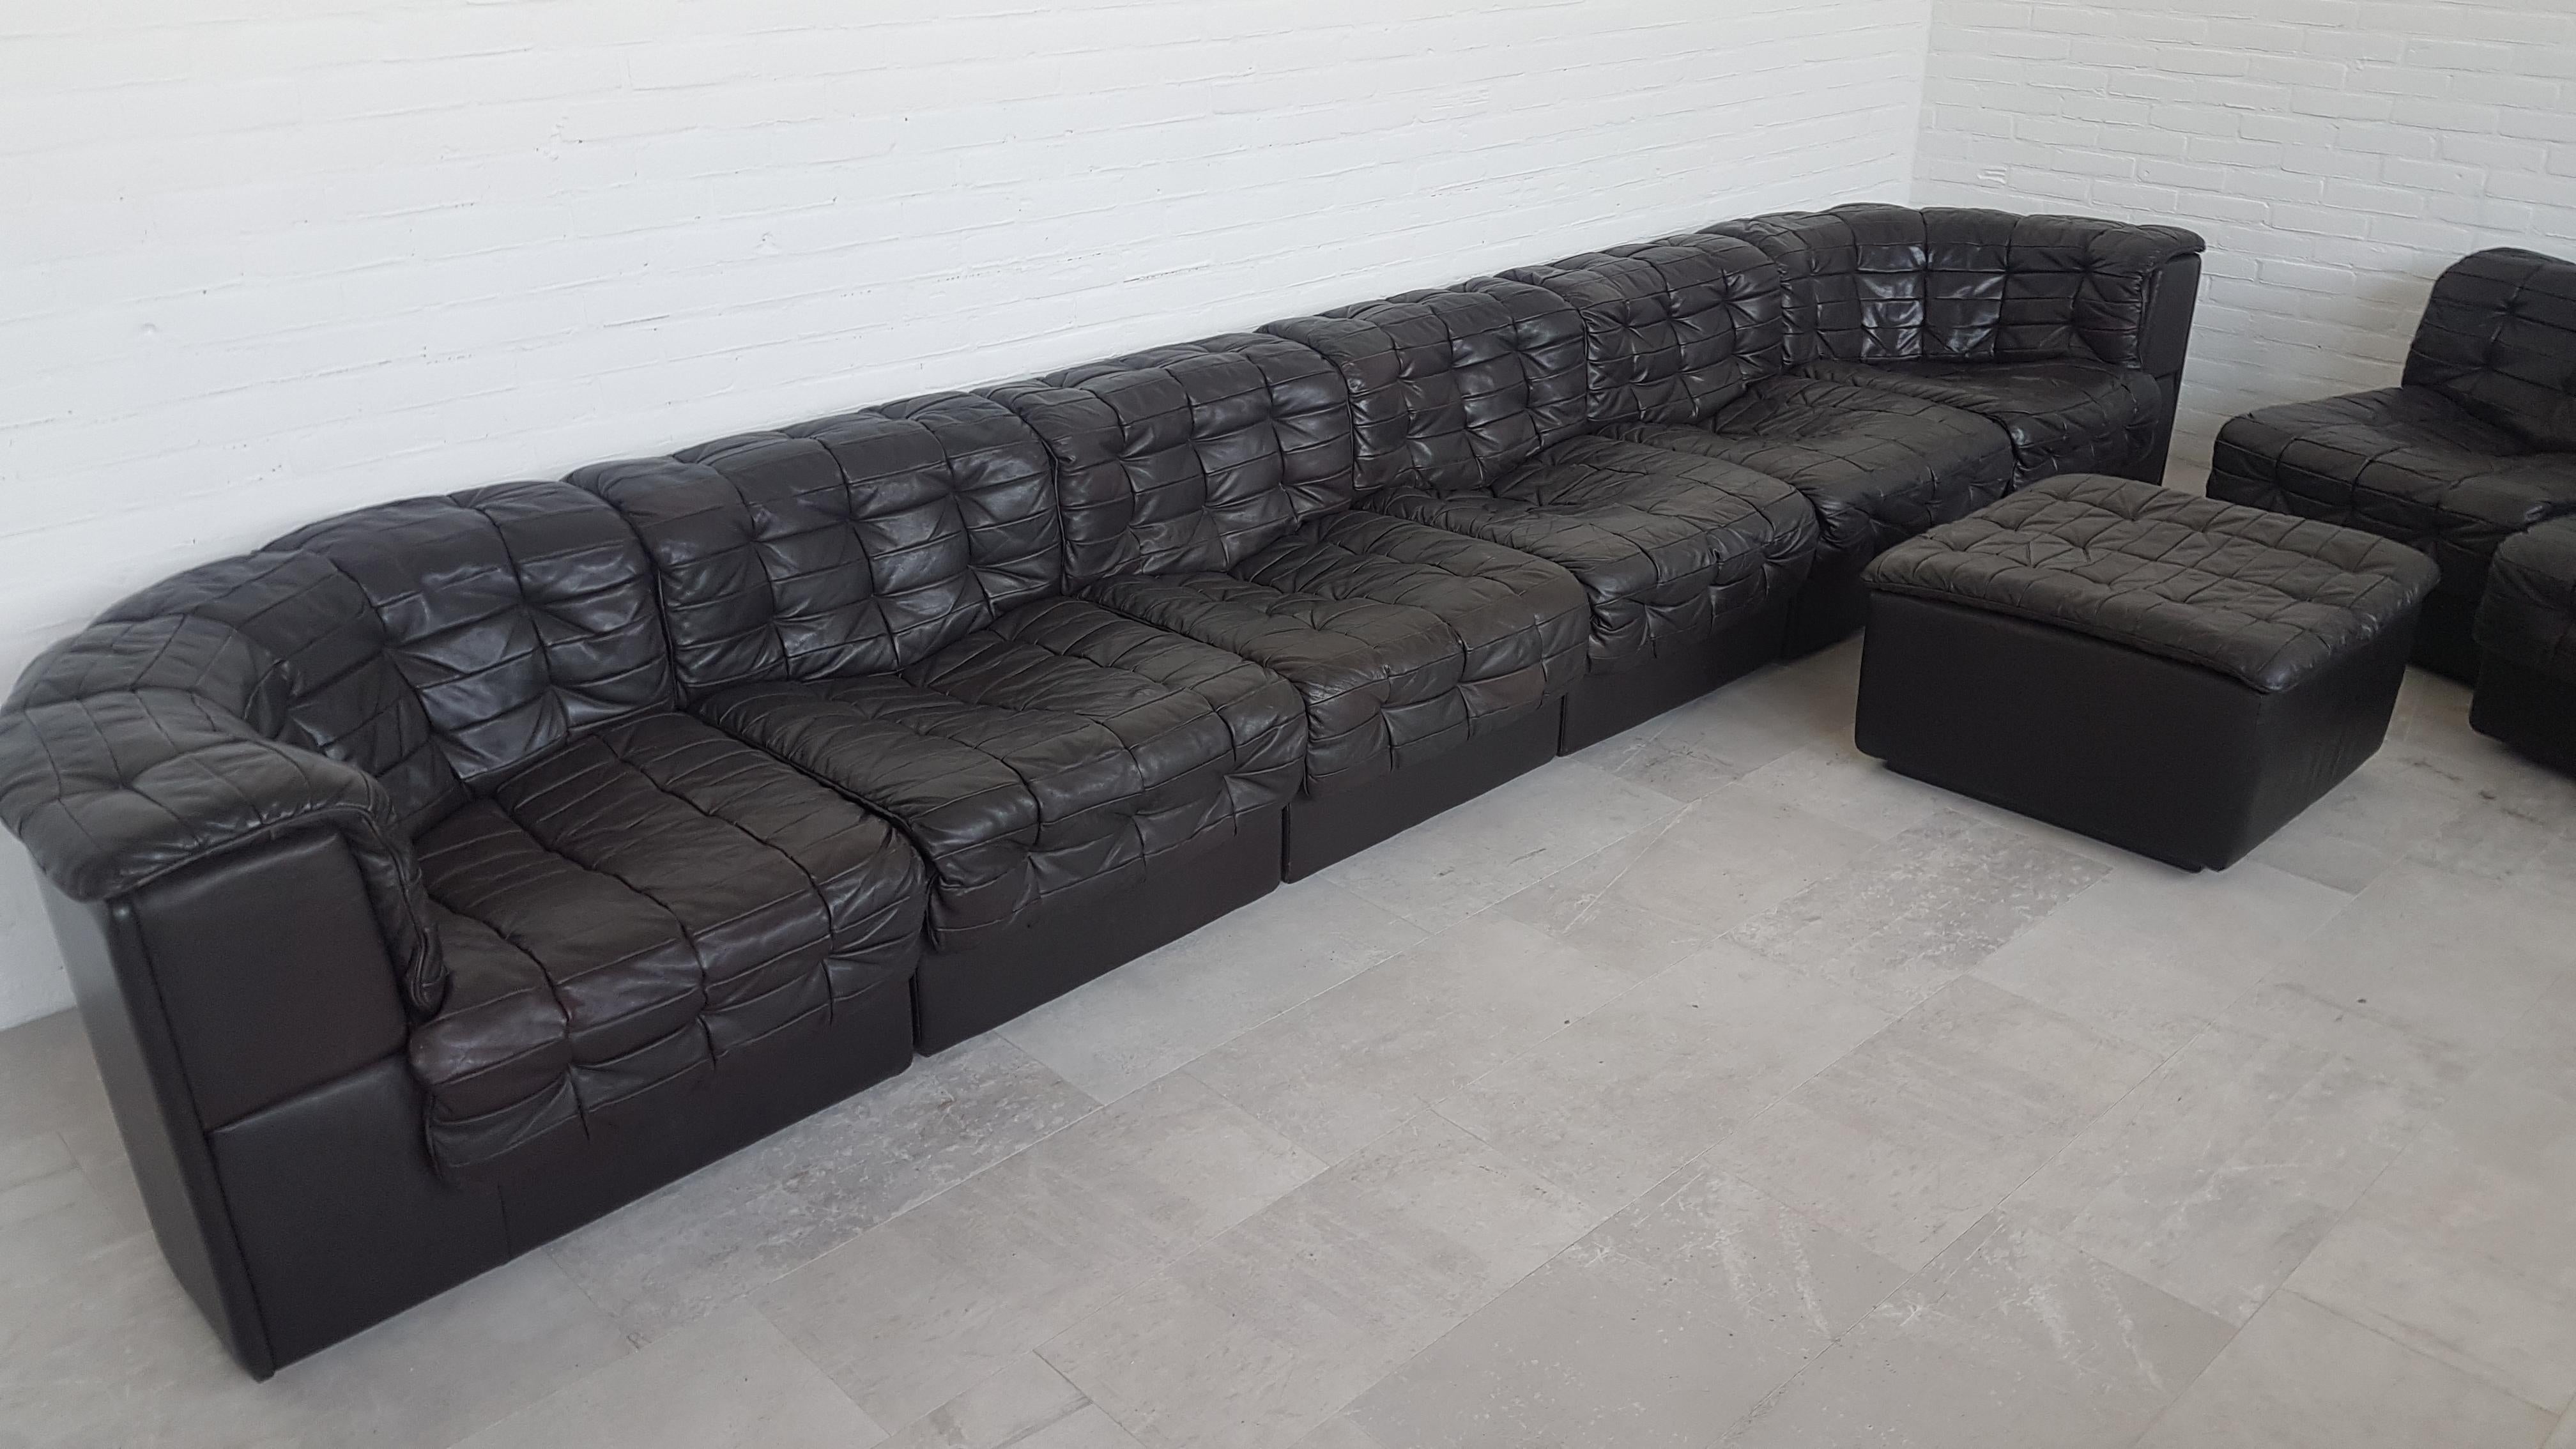 European Sectional Sofa by Luxury Leather Manufacturer De Sede Switzerland Model DS 11